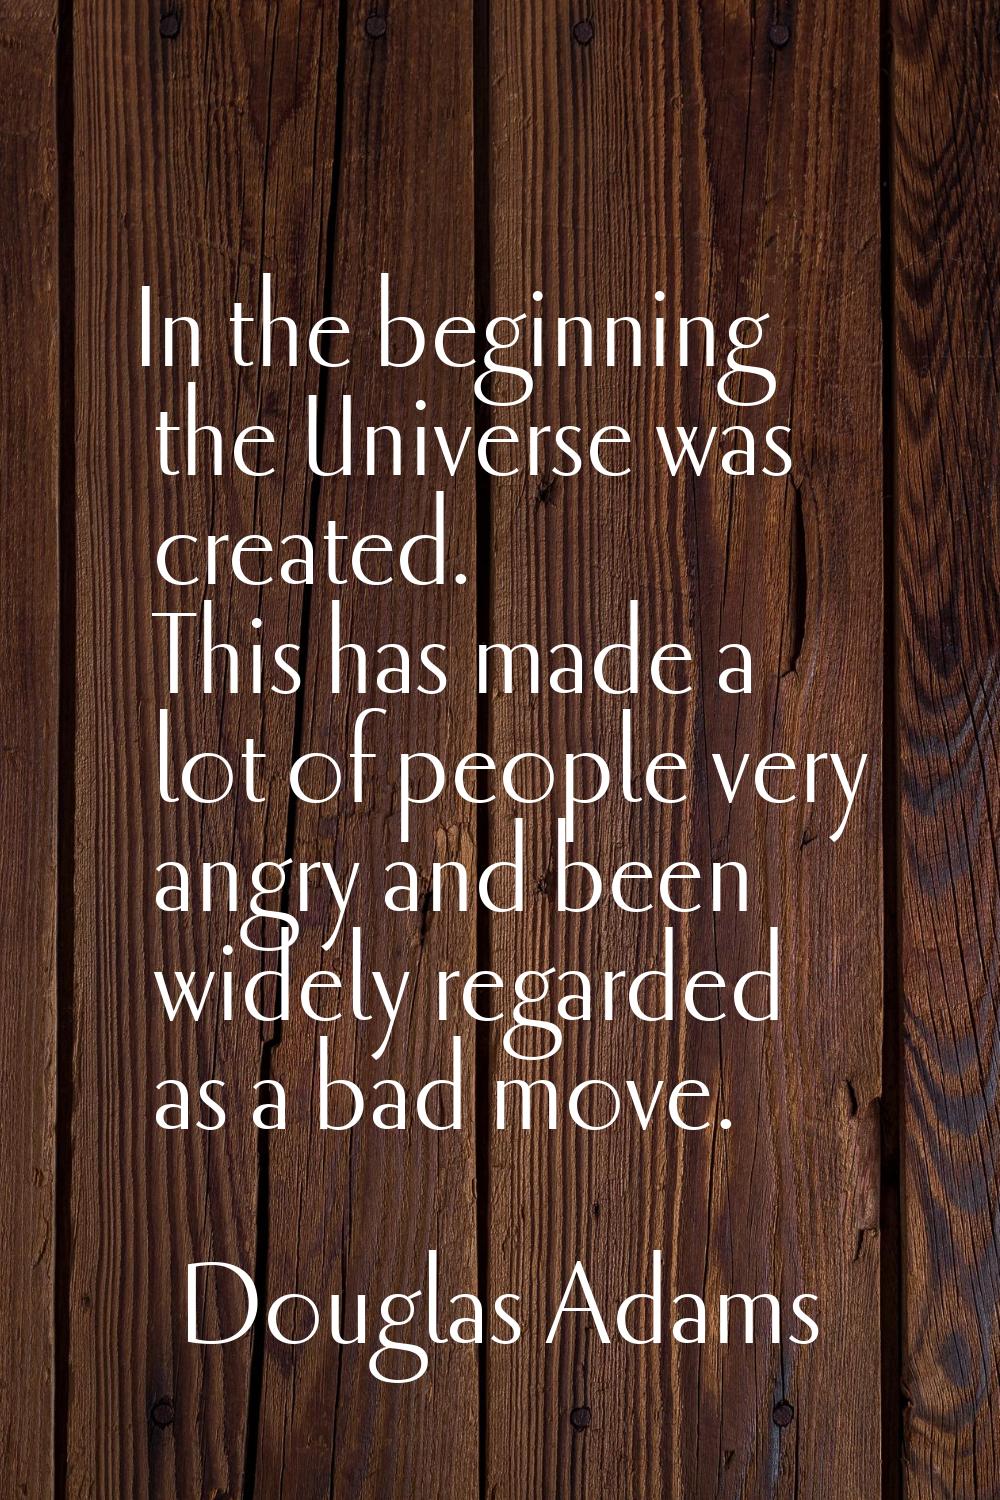 In the beginning the Universe was created. This has made a lot of people very angry and been widely